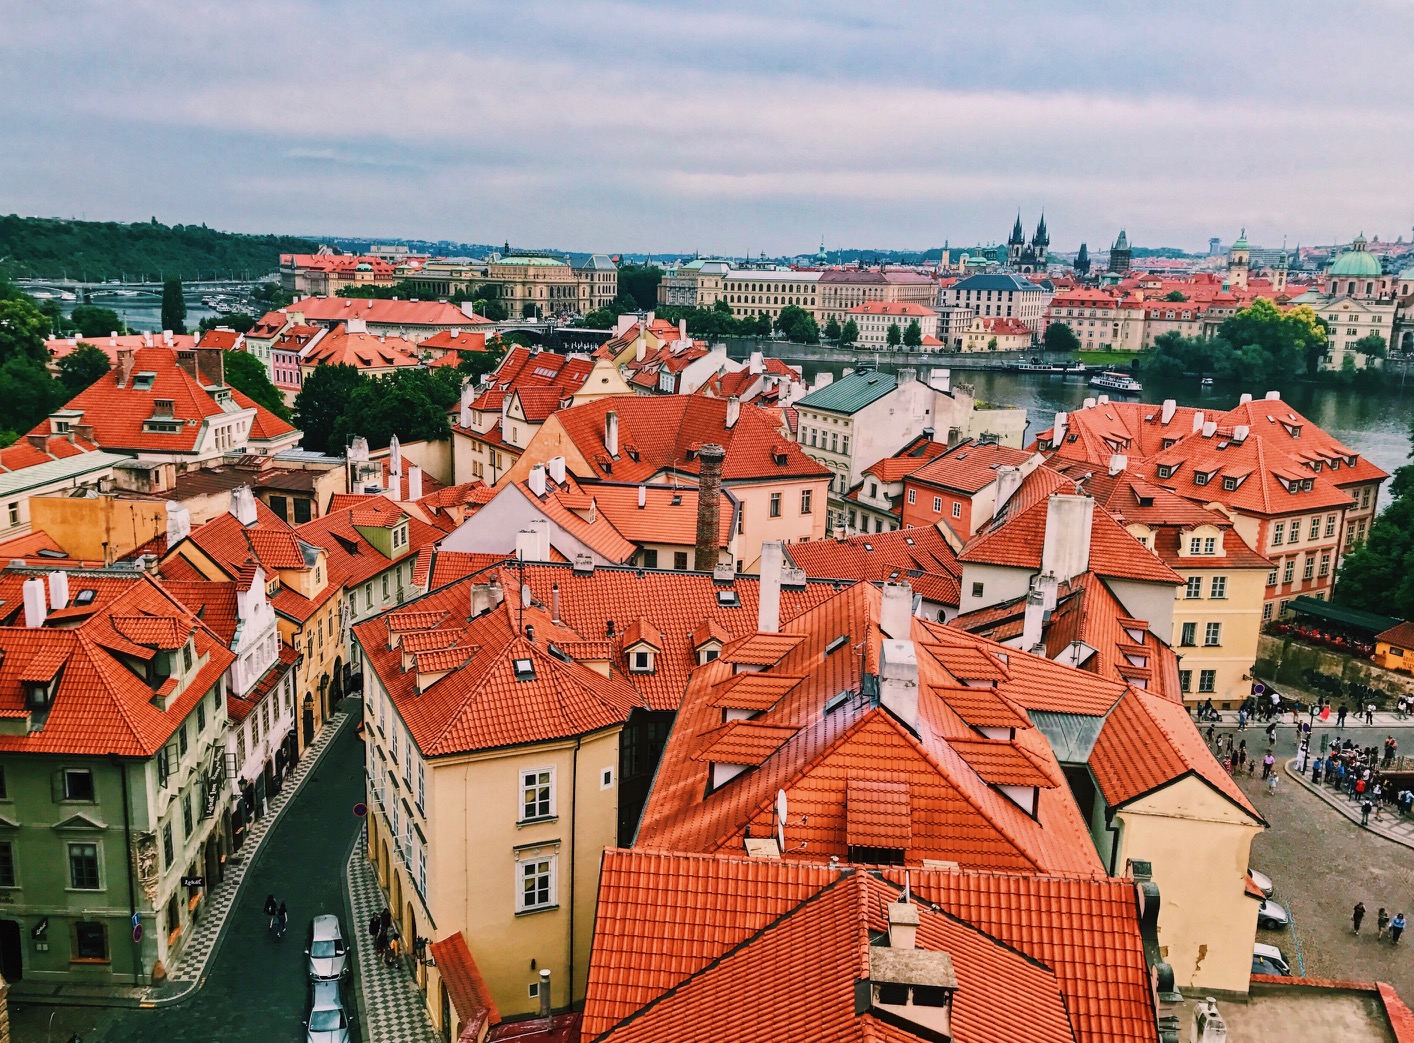 8 Tips for a Successful Study Abroad Experience in Prague | AIFS Study Abroad